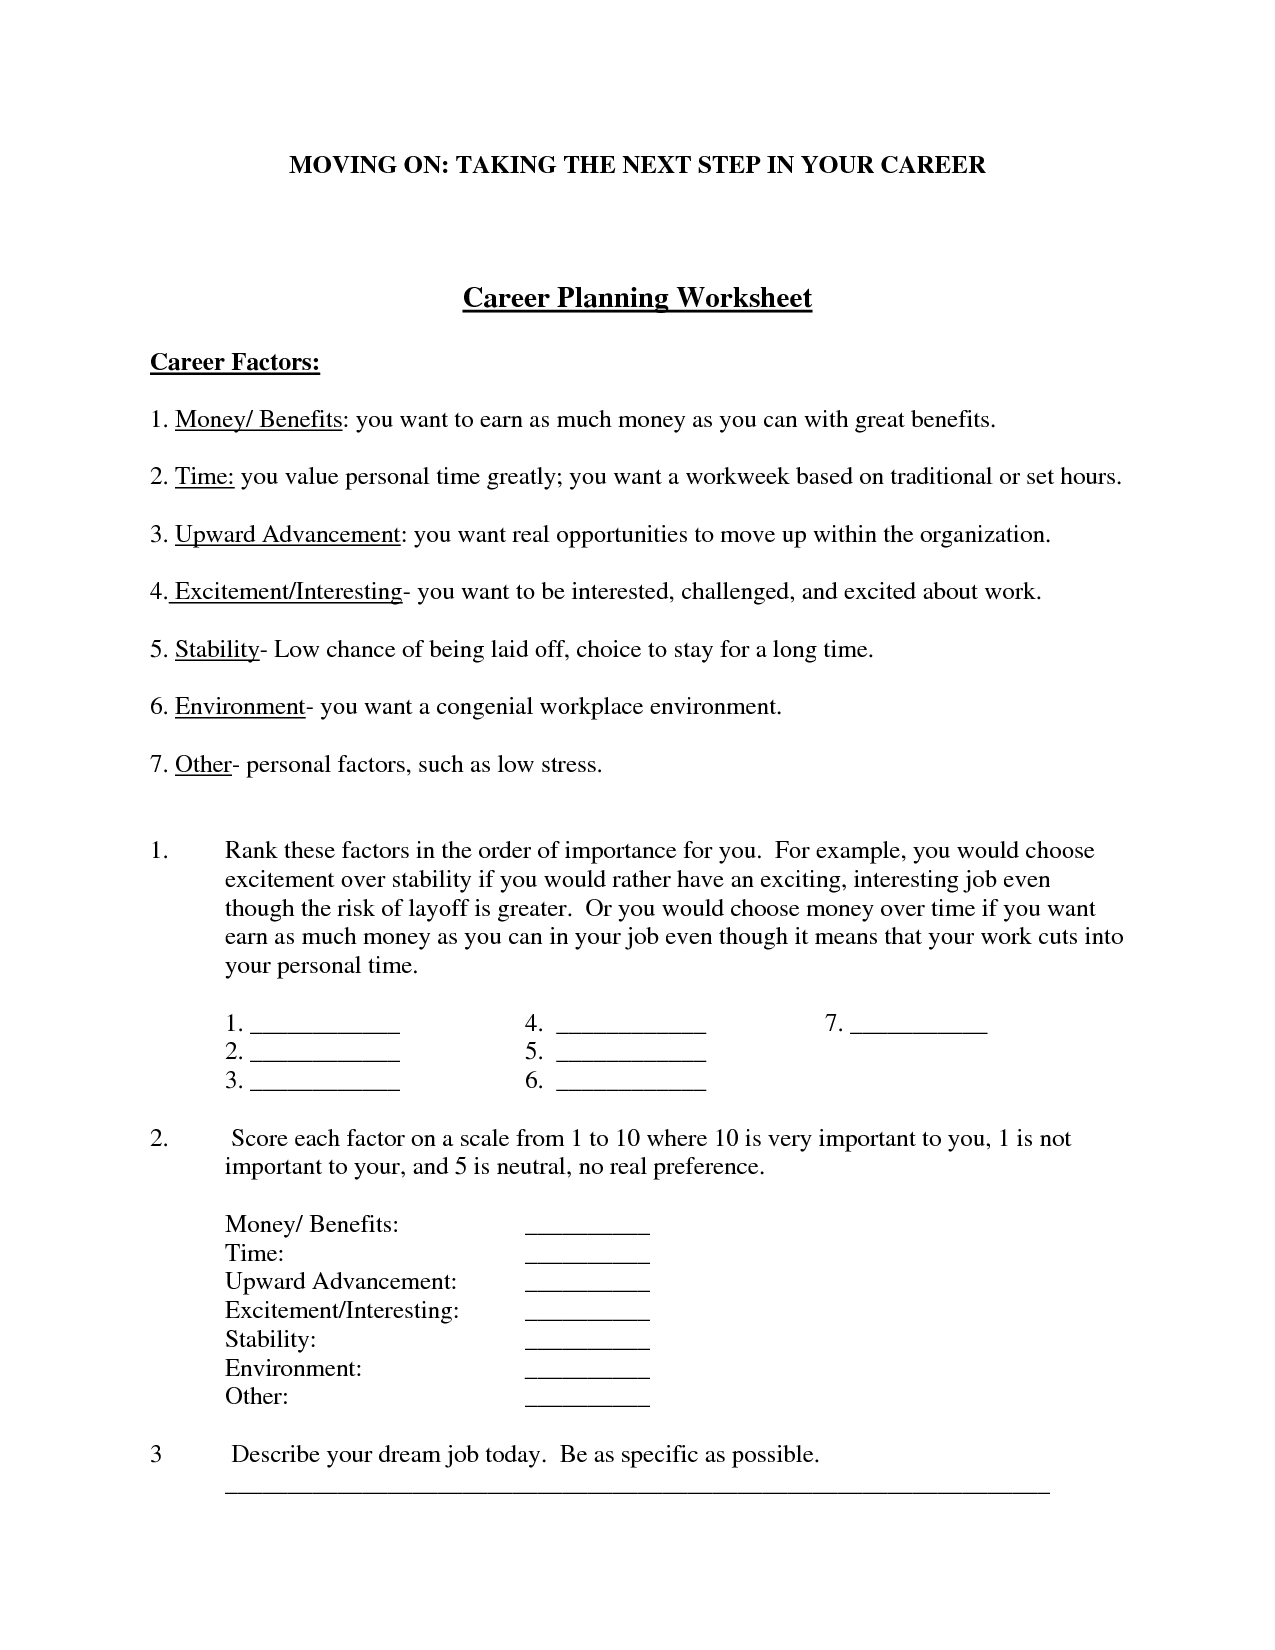 Personal and Career Planning Worksheets Image